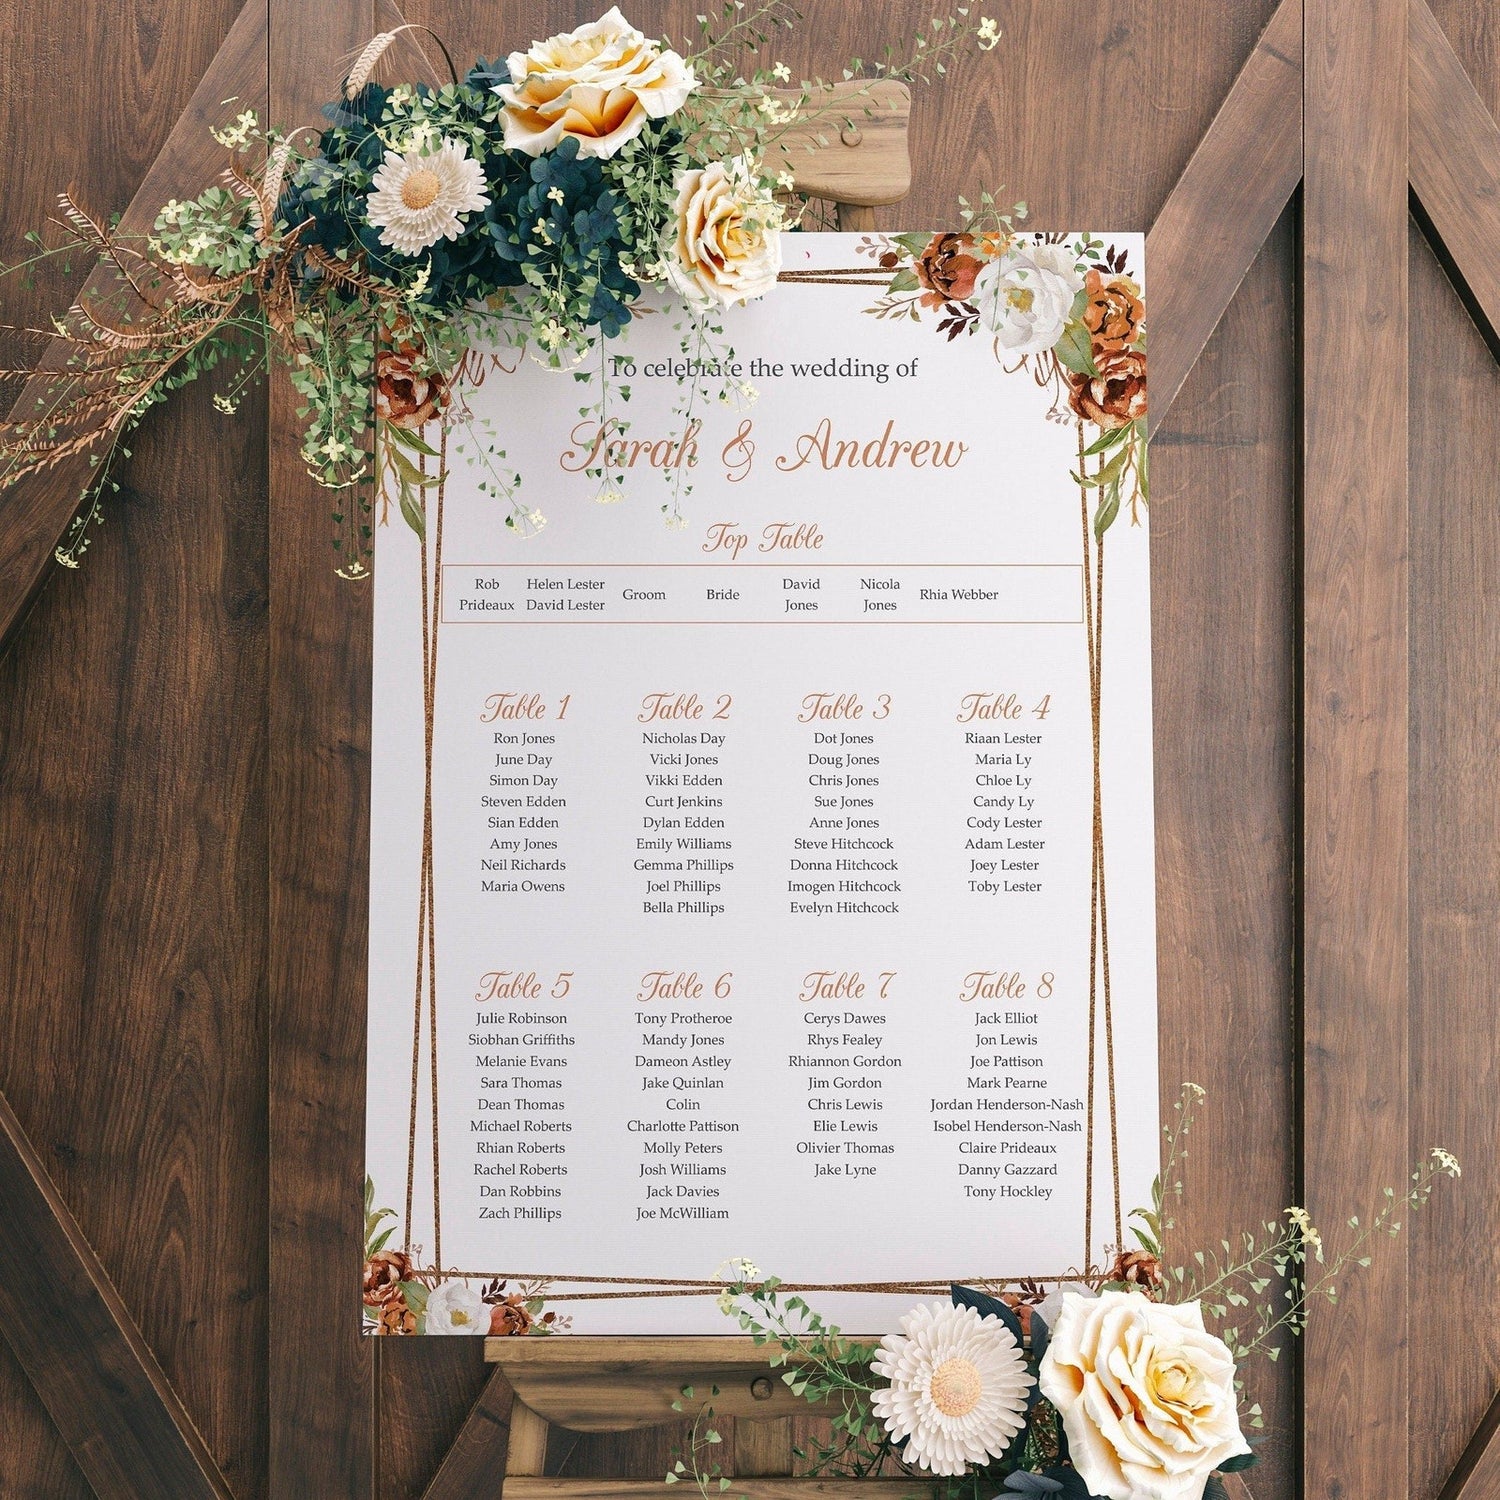 Autumn Copper Wedding Seating Chart Table Plan